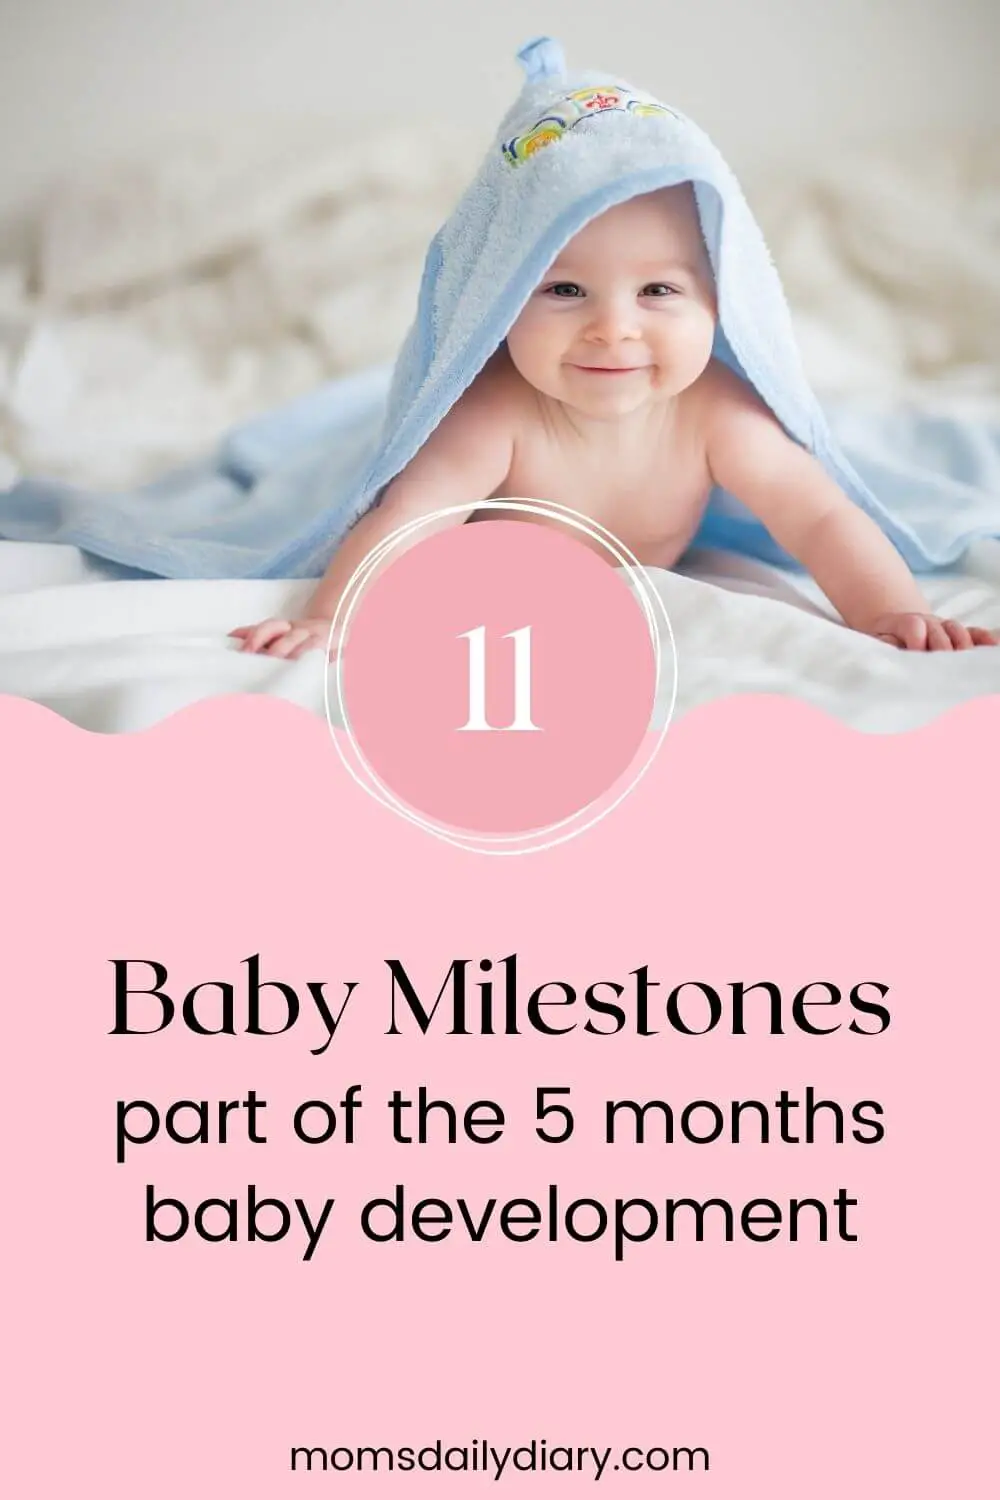 Pin image with text 11 Baby Milestones part of the 5 months baby development and image of a baby smiling during tummy time and covered with a towel.